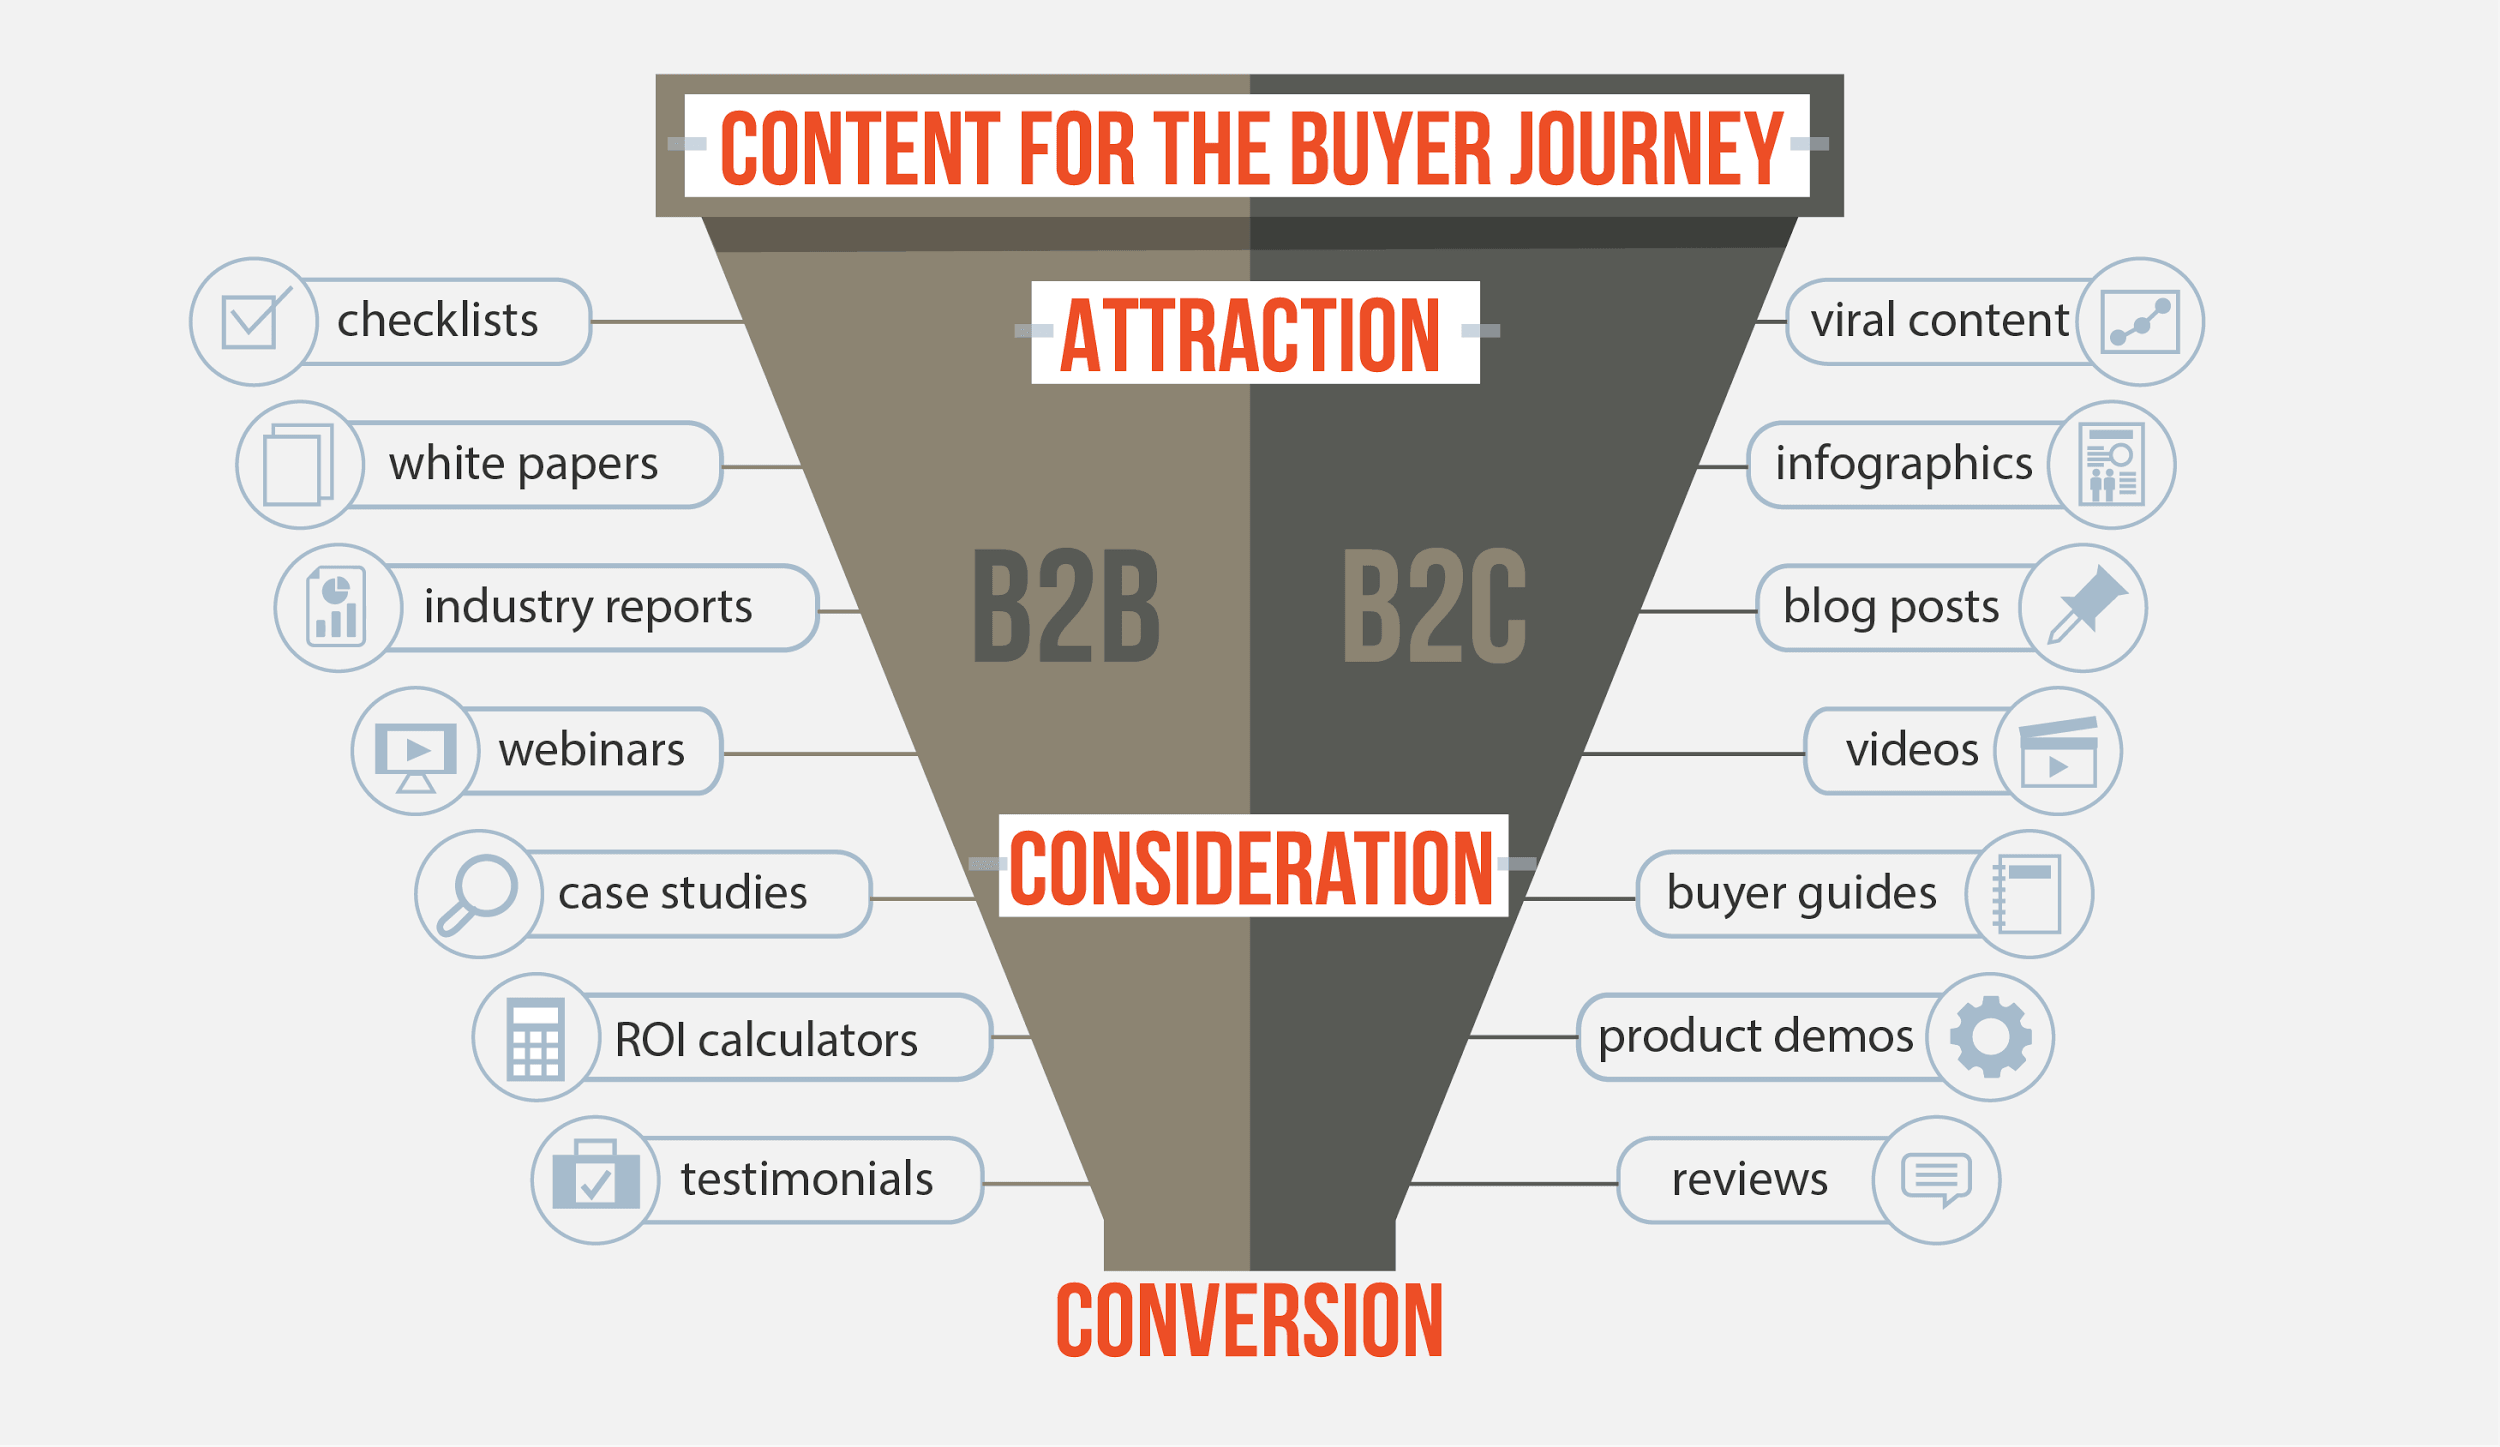 Content for the buyer journey